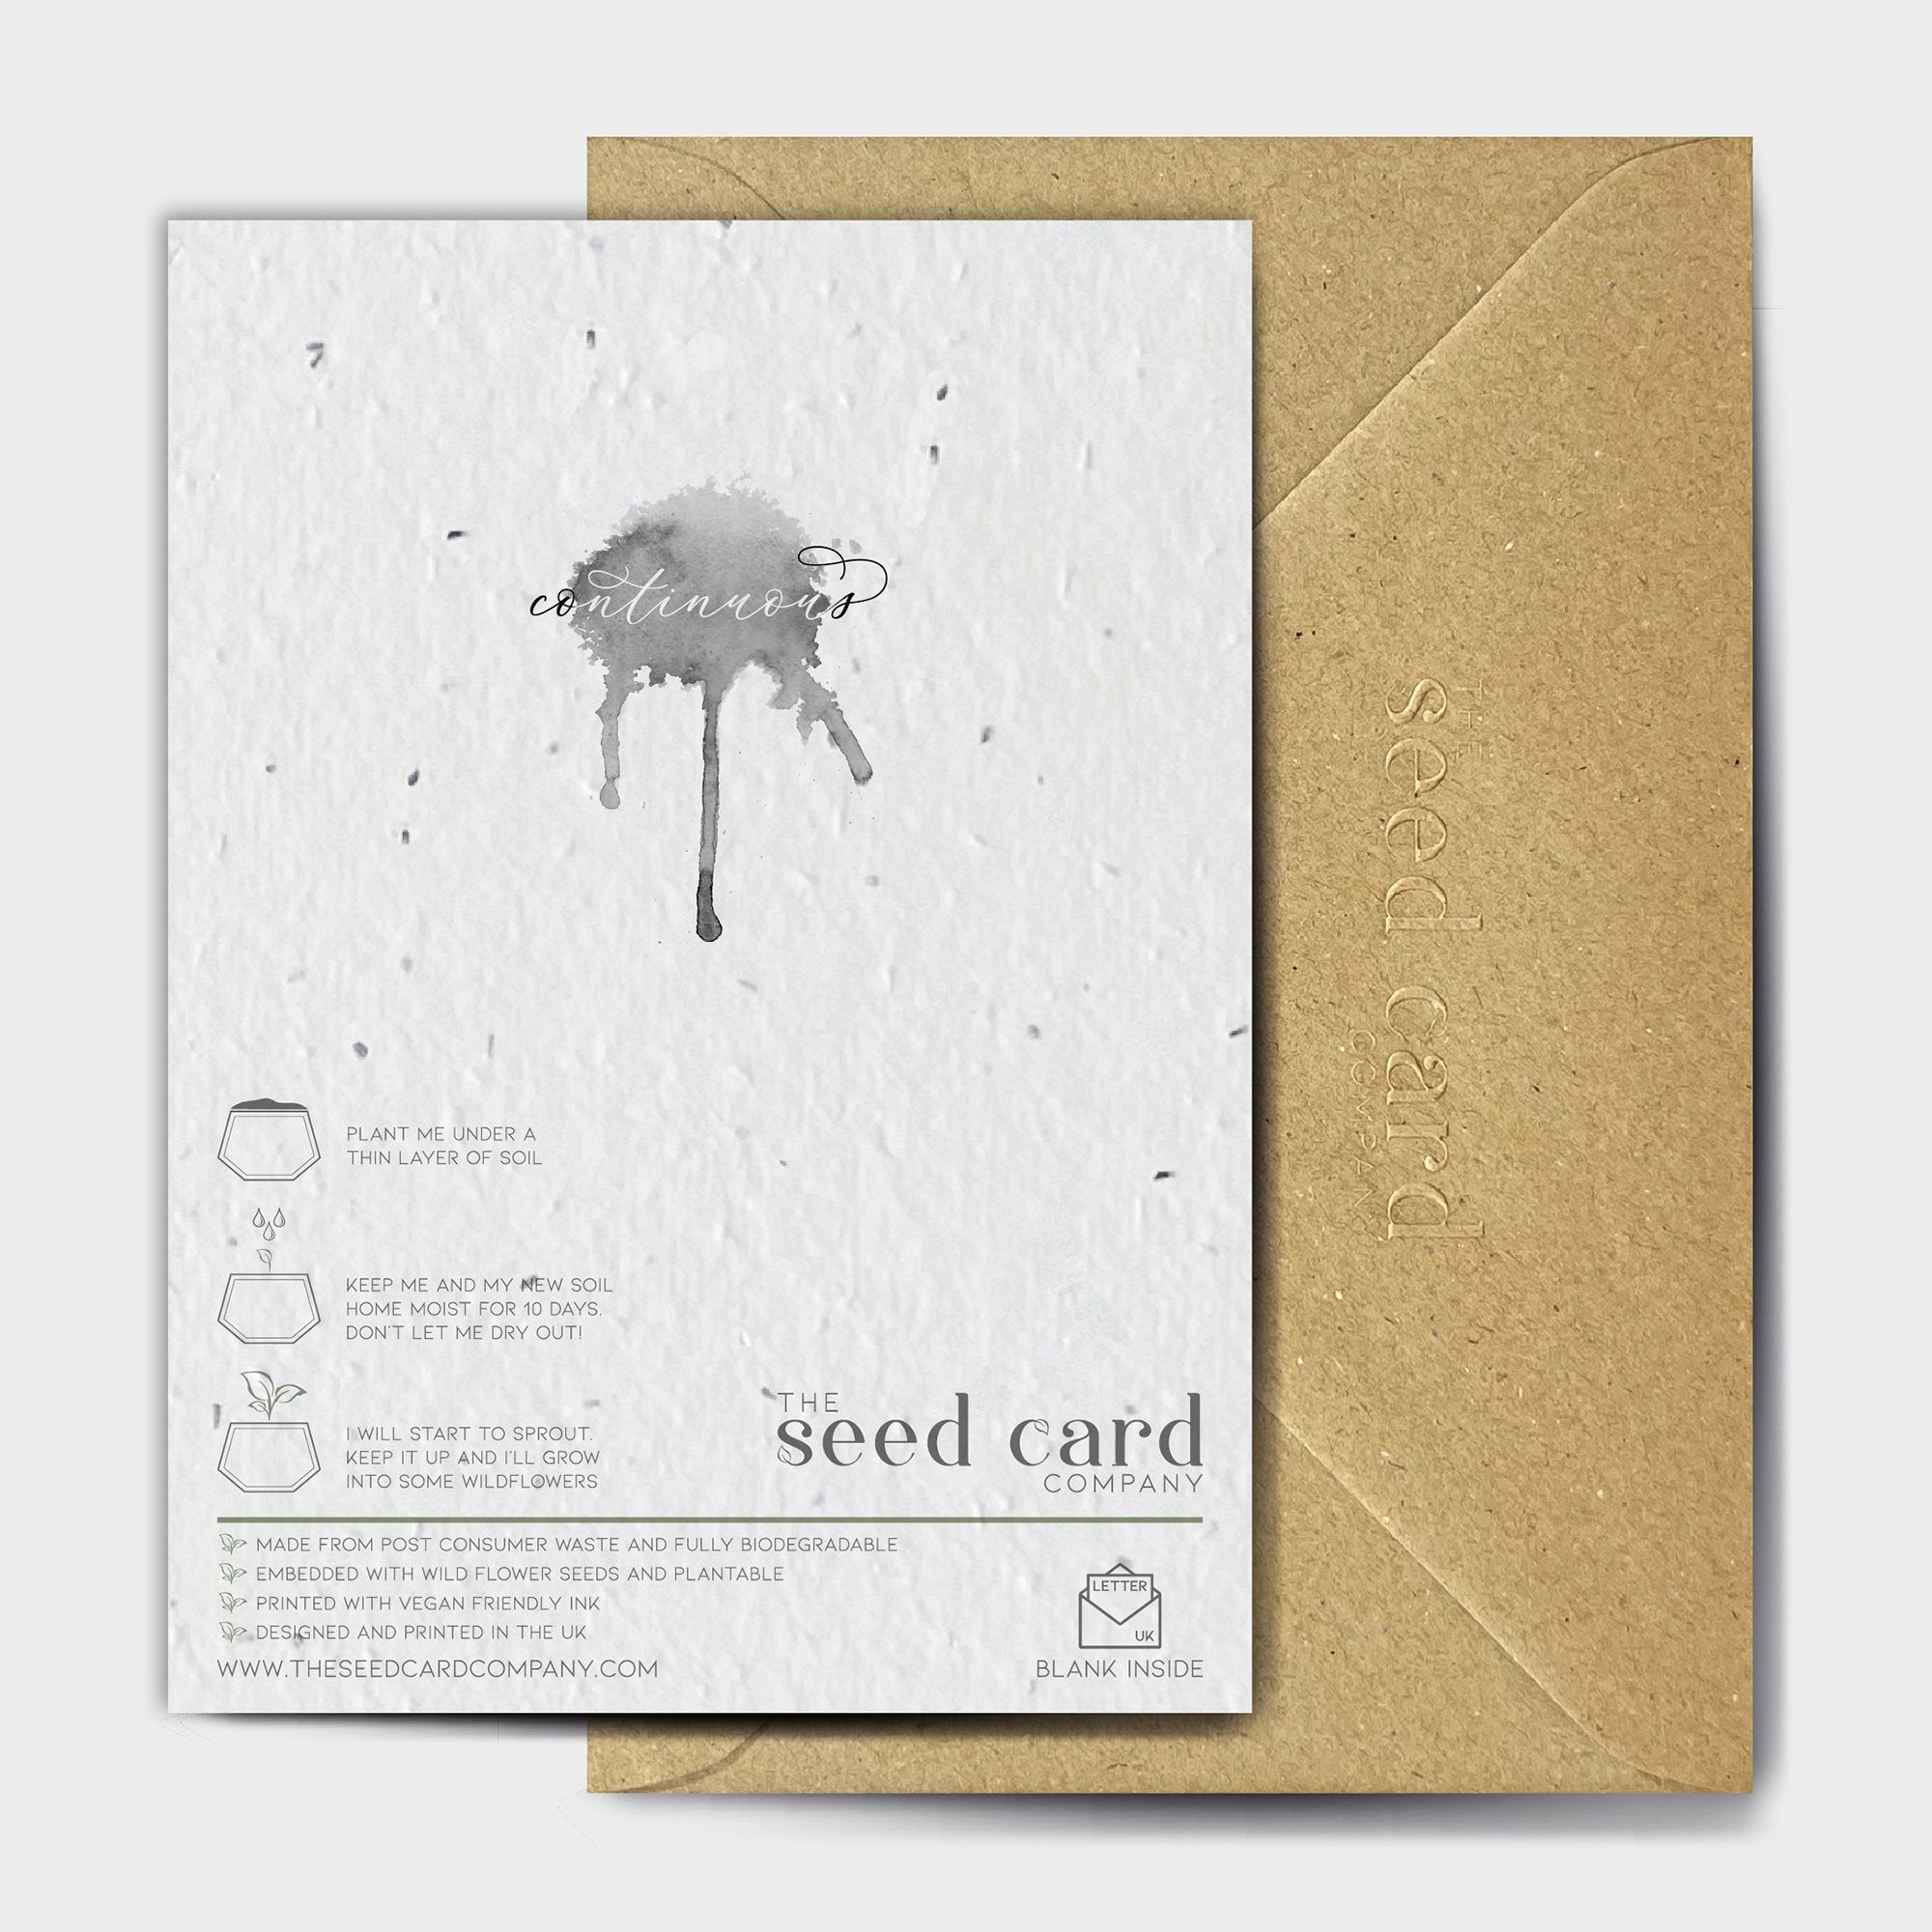 Shop online The Bratwurst - 100% biodegradable seed-embedded cards Shop -The Seed Card Company